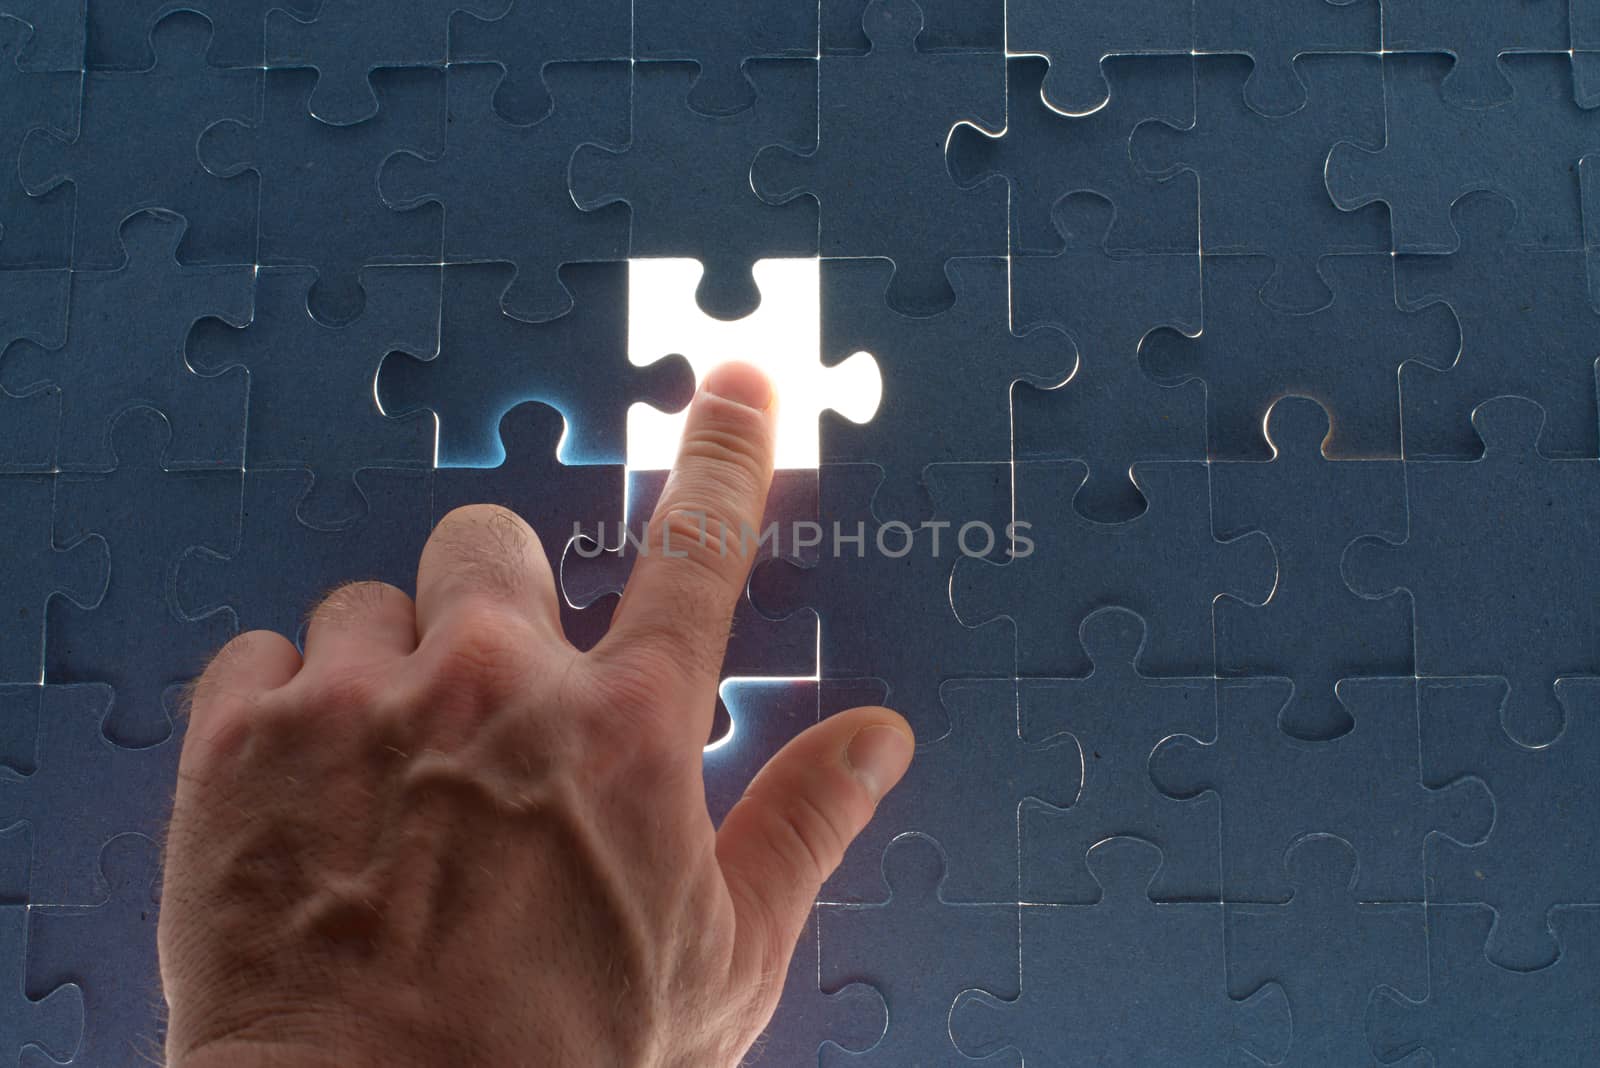 Missing jigsaw puzzle piece for completing the final puzzle piece, closeup